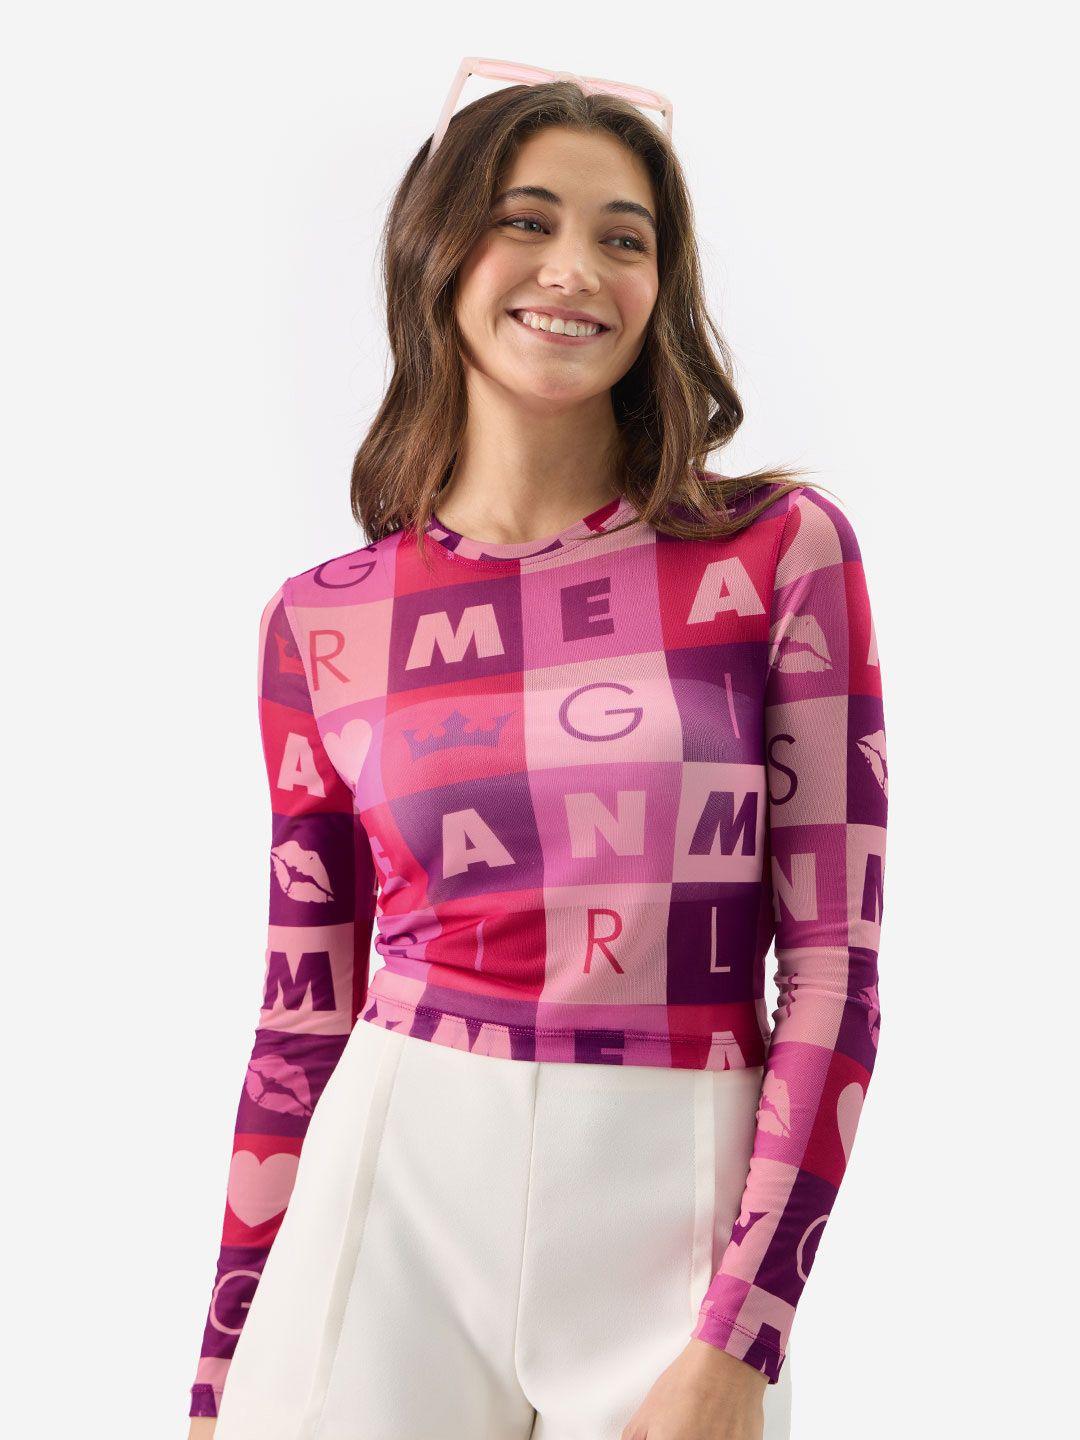 the-souled-store-pink-typography-printed-fitted-top